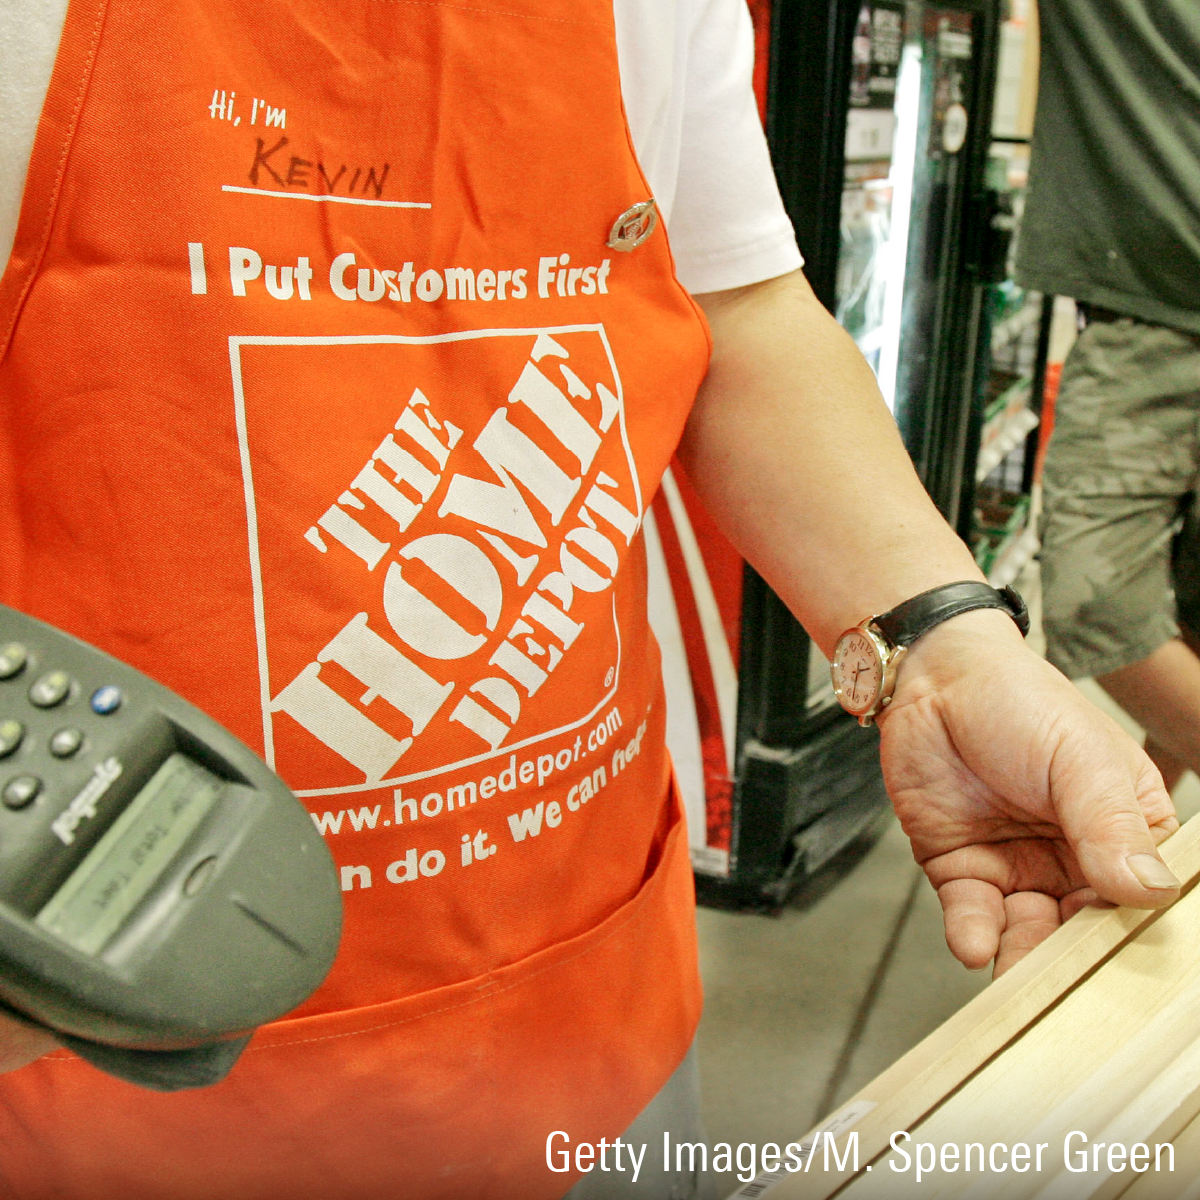 Home Depot: Prudently Navigating Macro Pressures With Strategic Execution